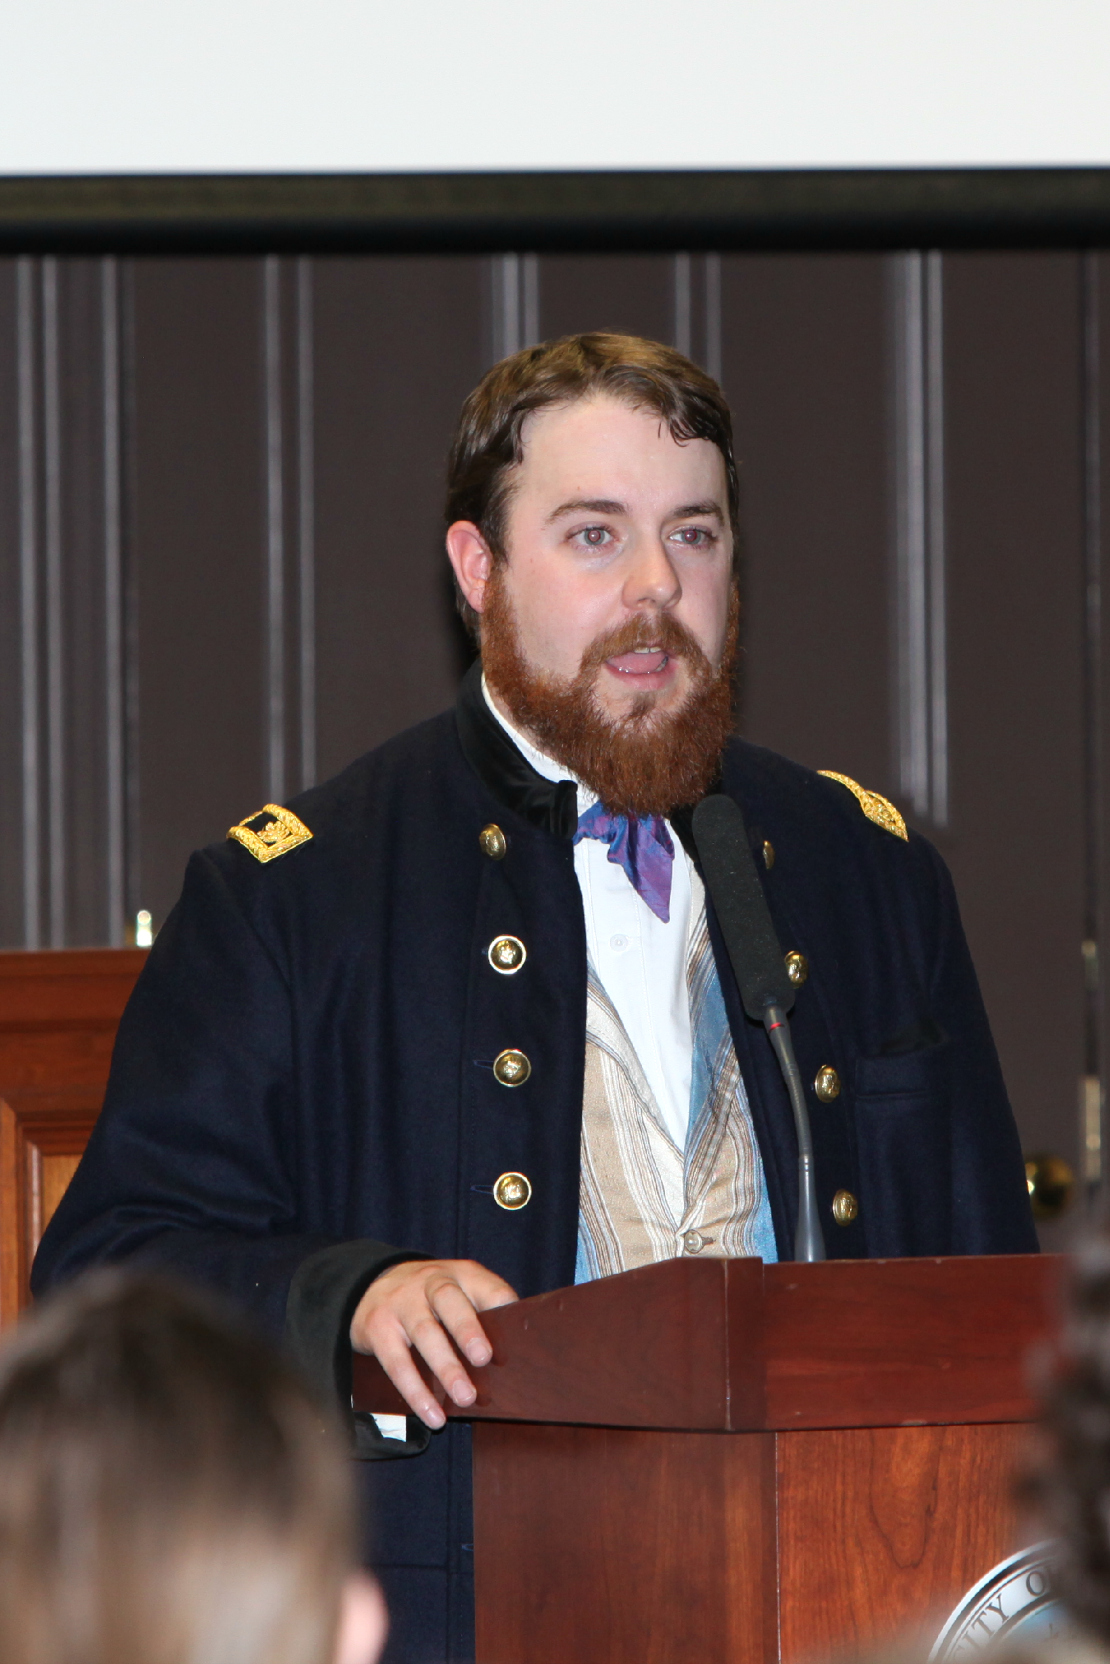 A young, bearded man in Civil War attire speaks at a microphone.